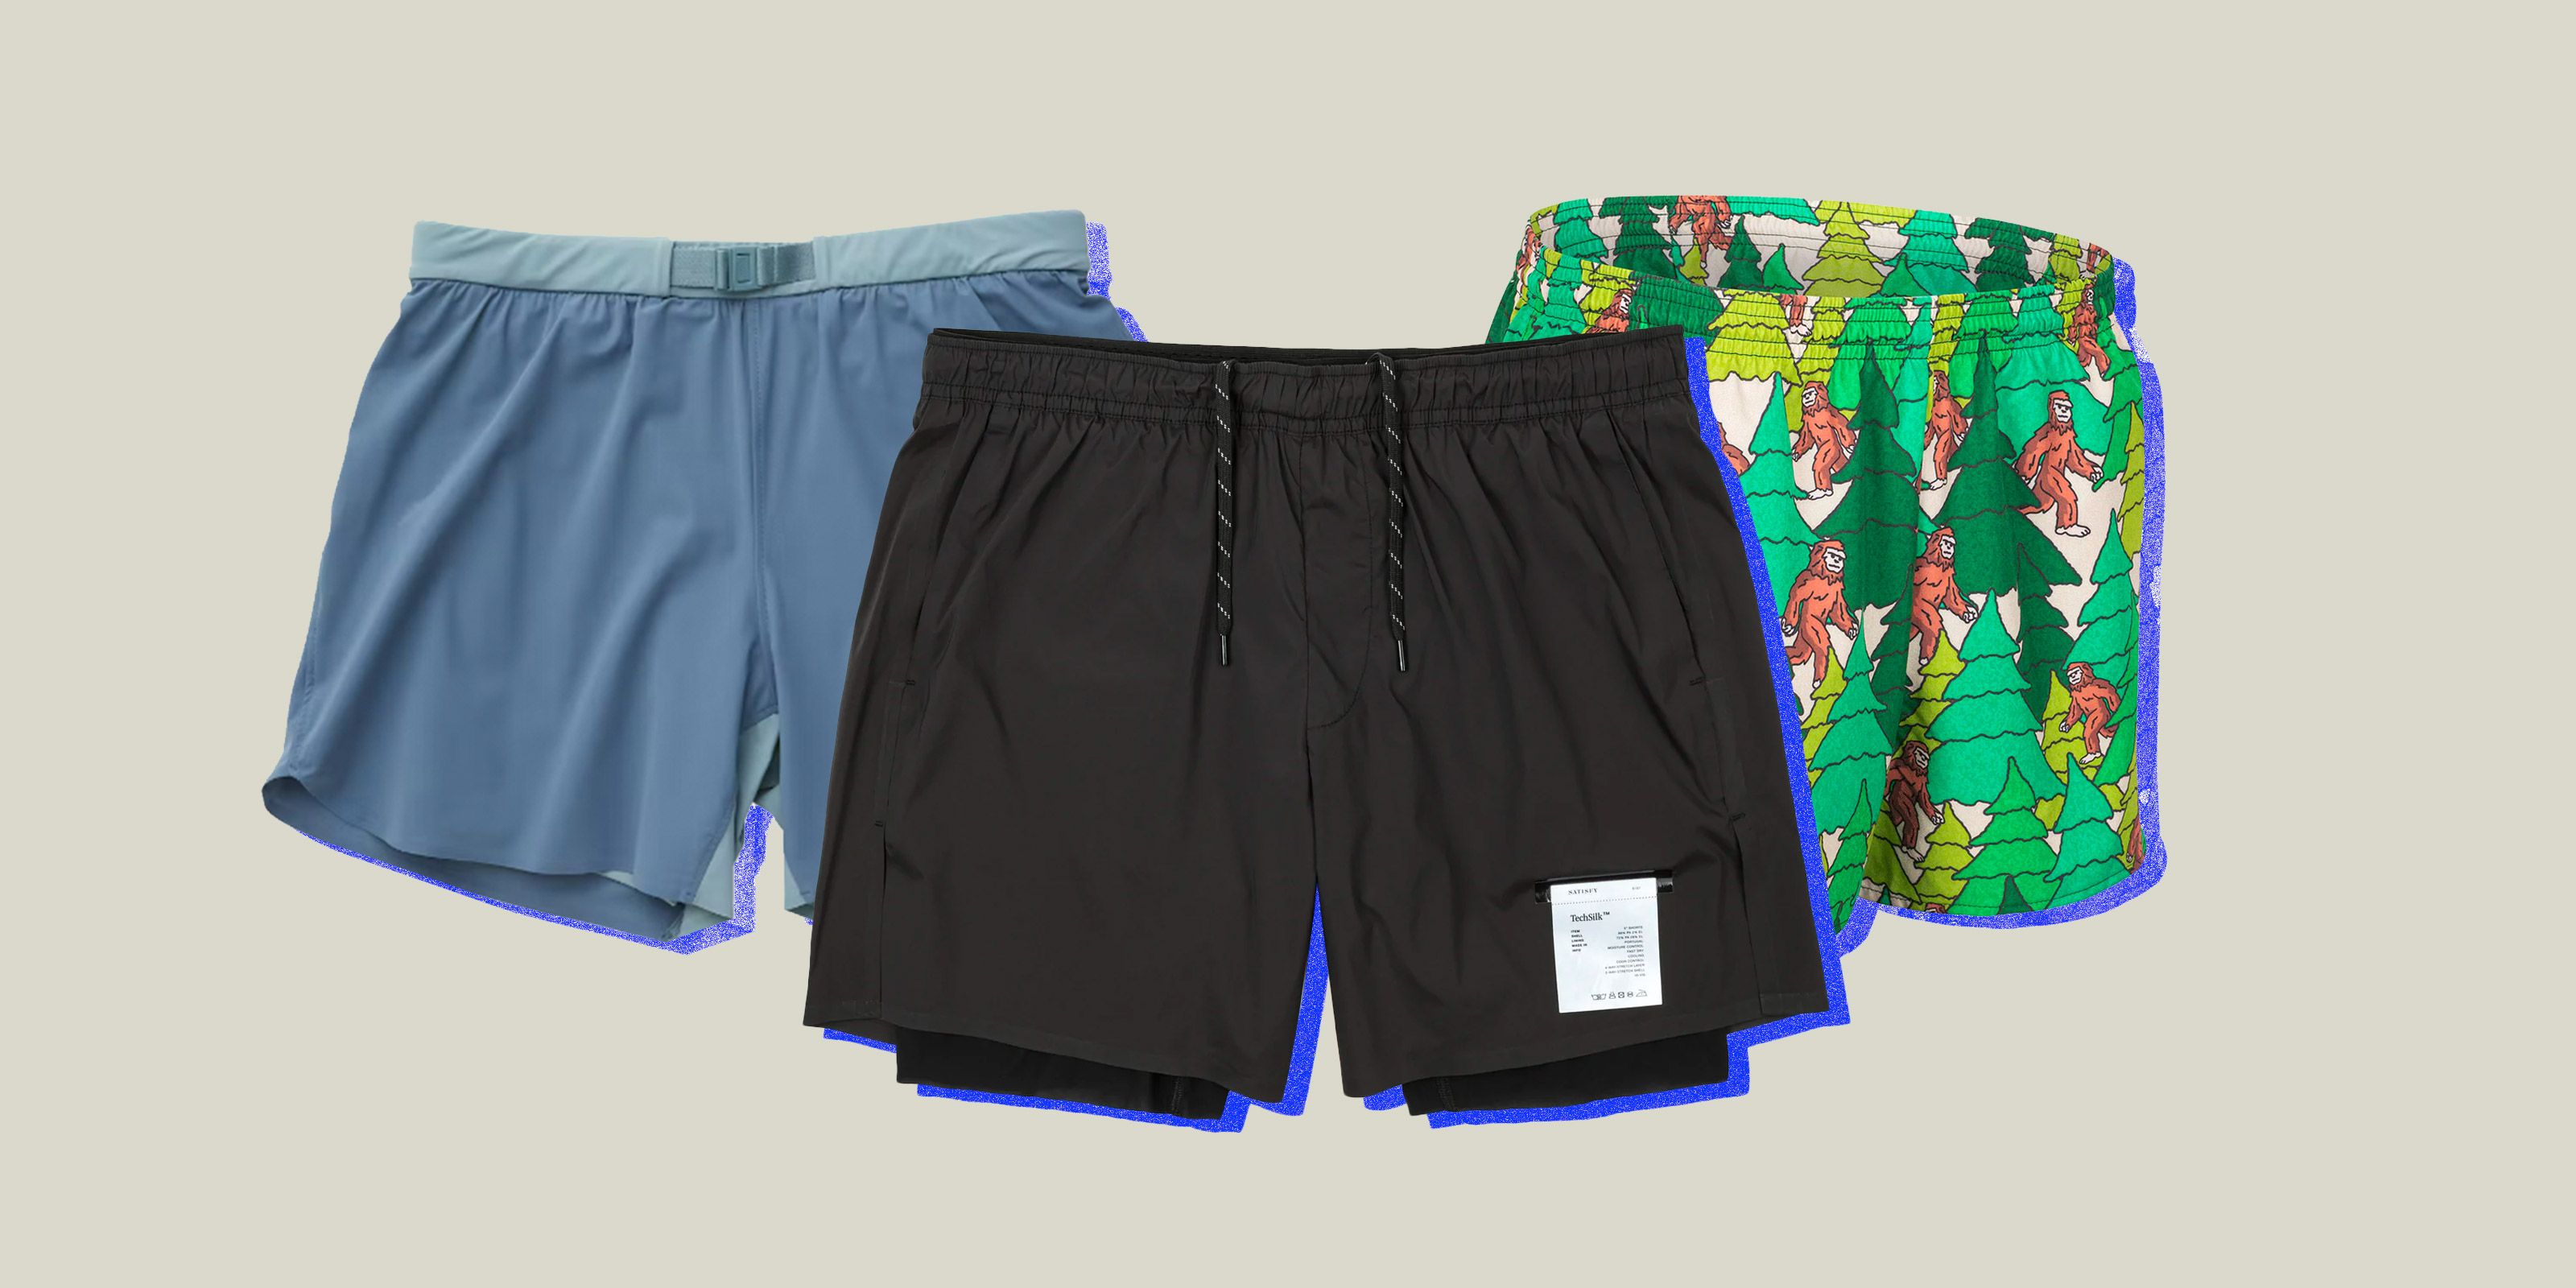 The Best Running Shorts for Every Type of Runner